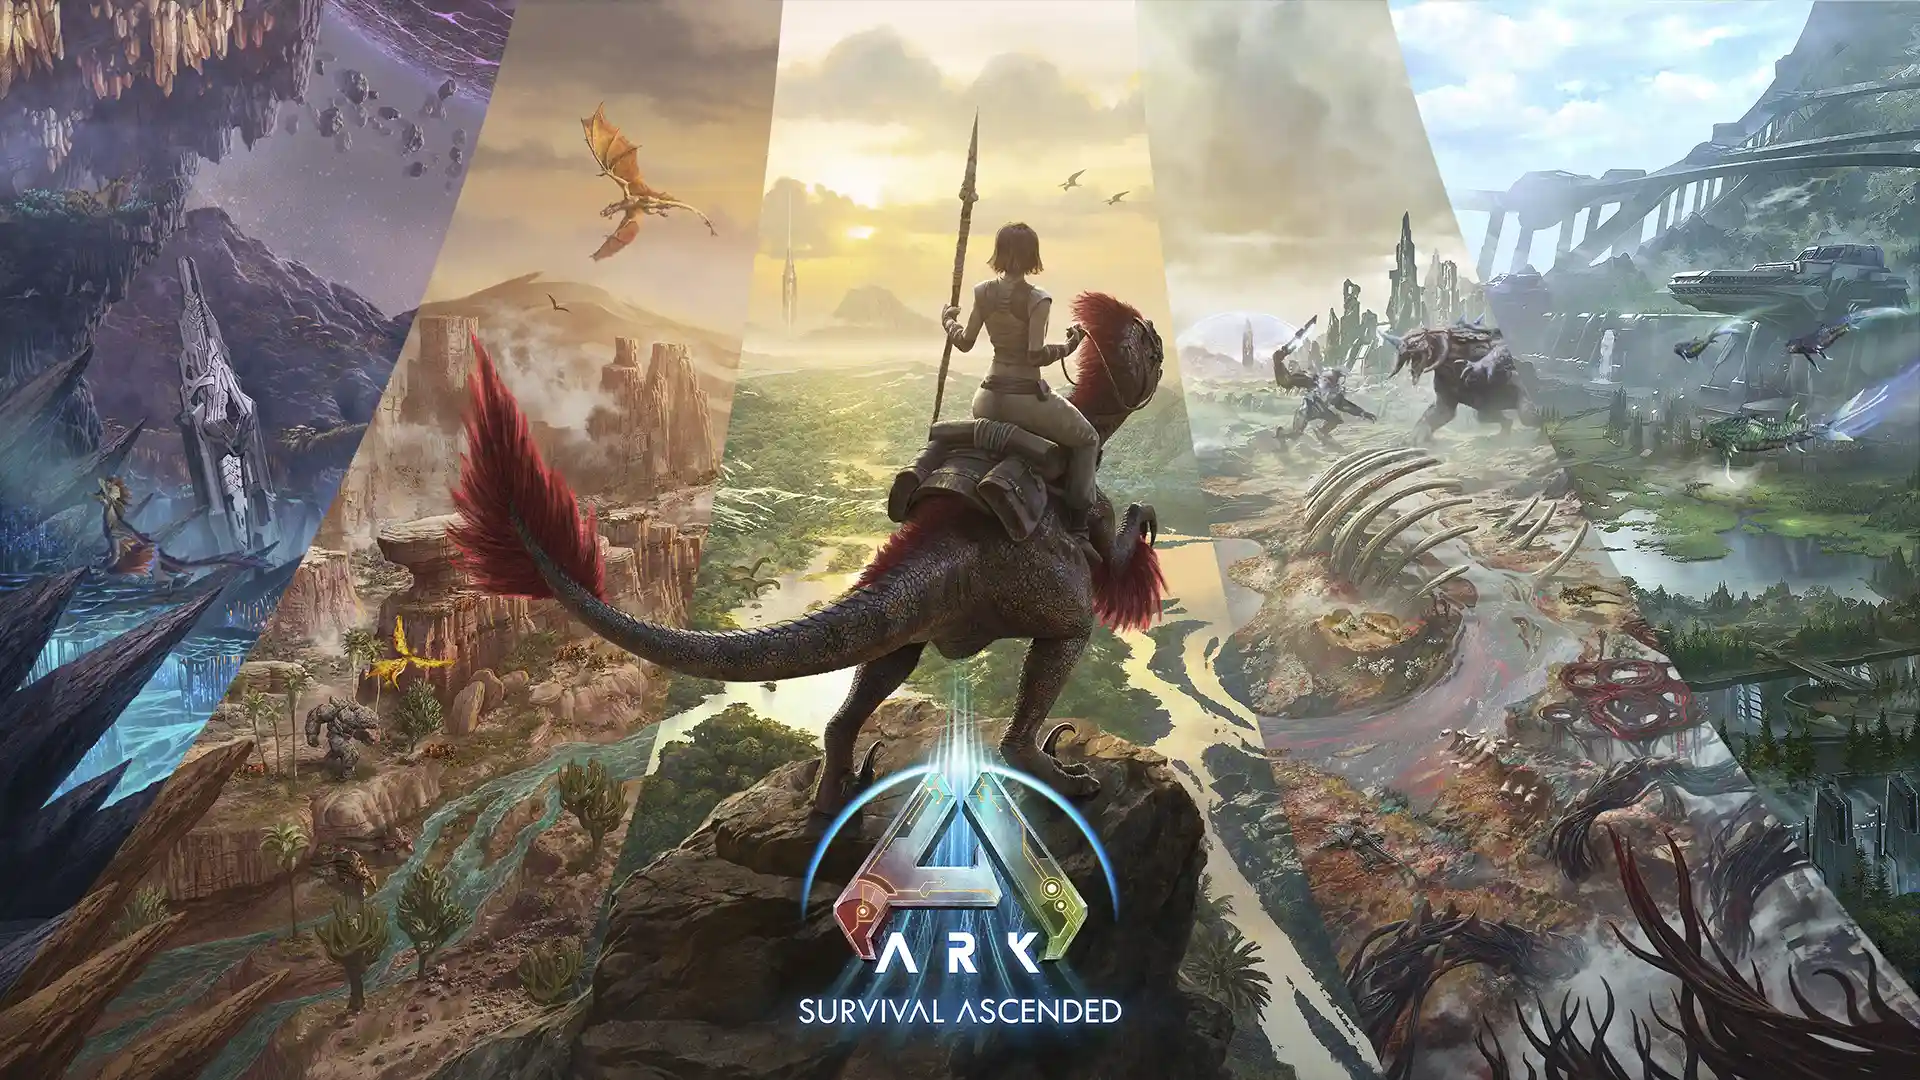 Ark survival ascended scorched earth. АРК Ascended. Ark Survival Ascended. Ark Ascended. Ark Ascended купить.